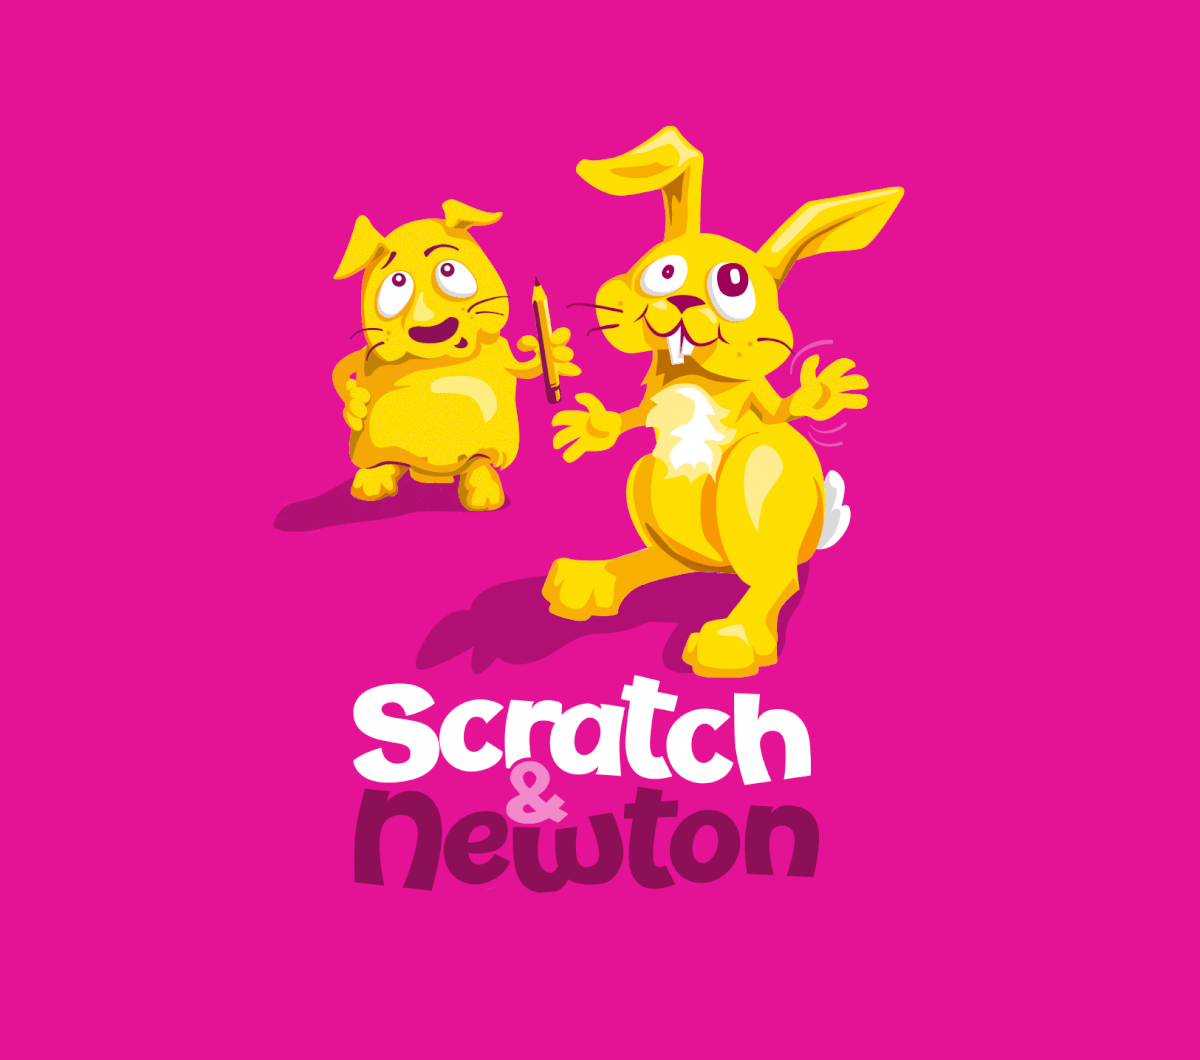 Scratch and Newton